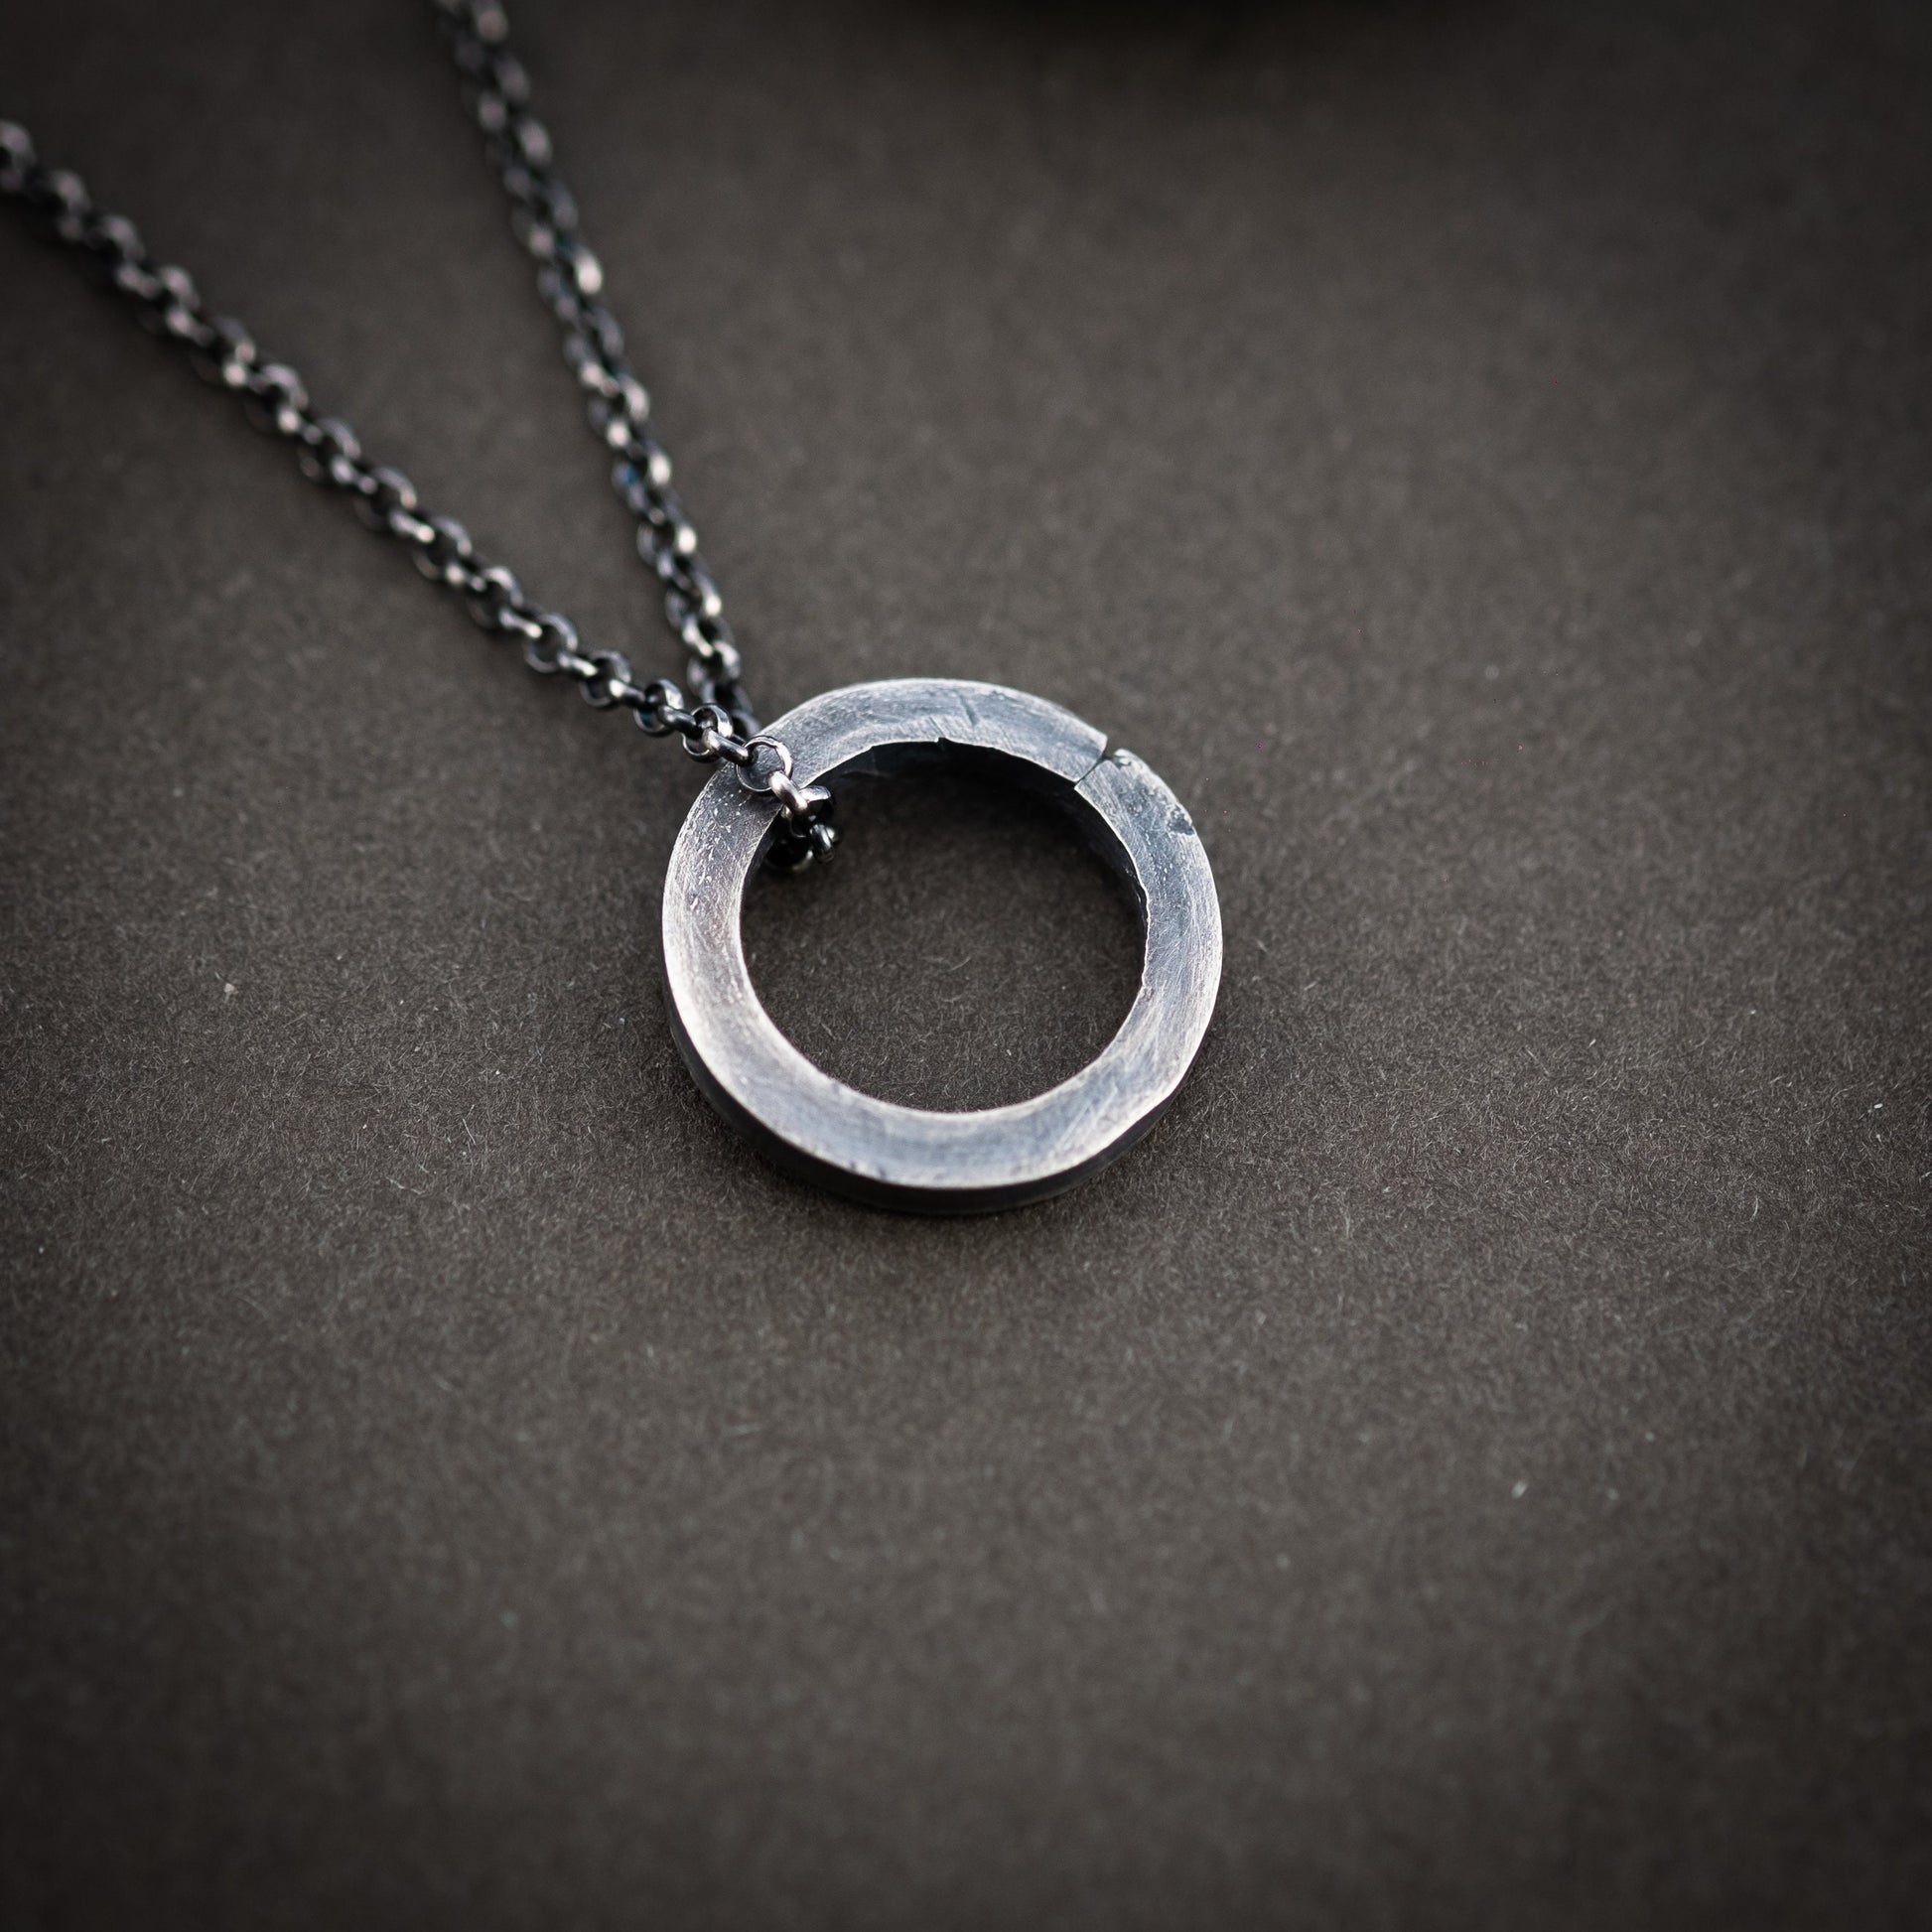 Mens Circle mens necklace, Minimalist Protection amulet, Viking Handmade Silver jewelry, Unique Gift for women, Boyfriend gift